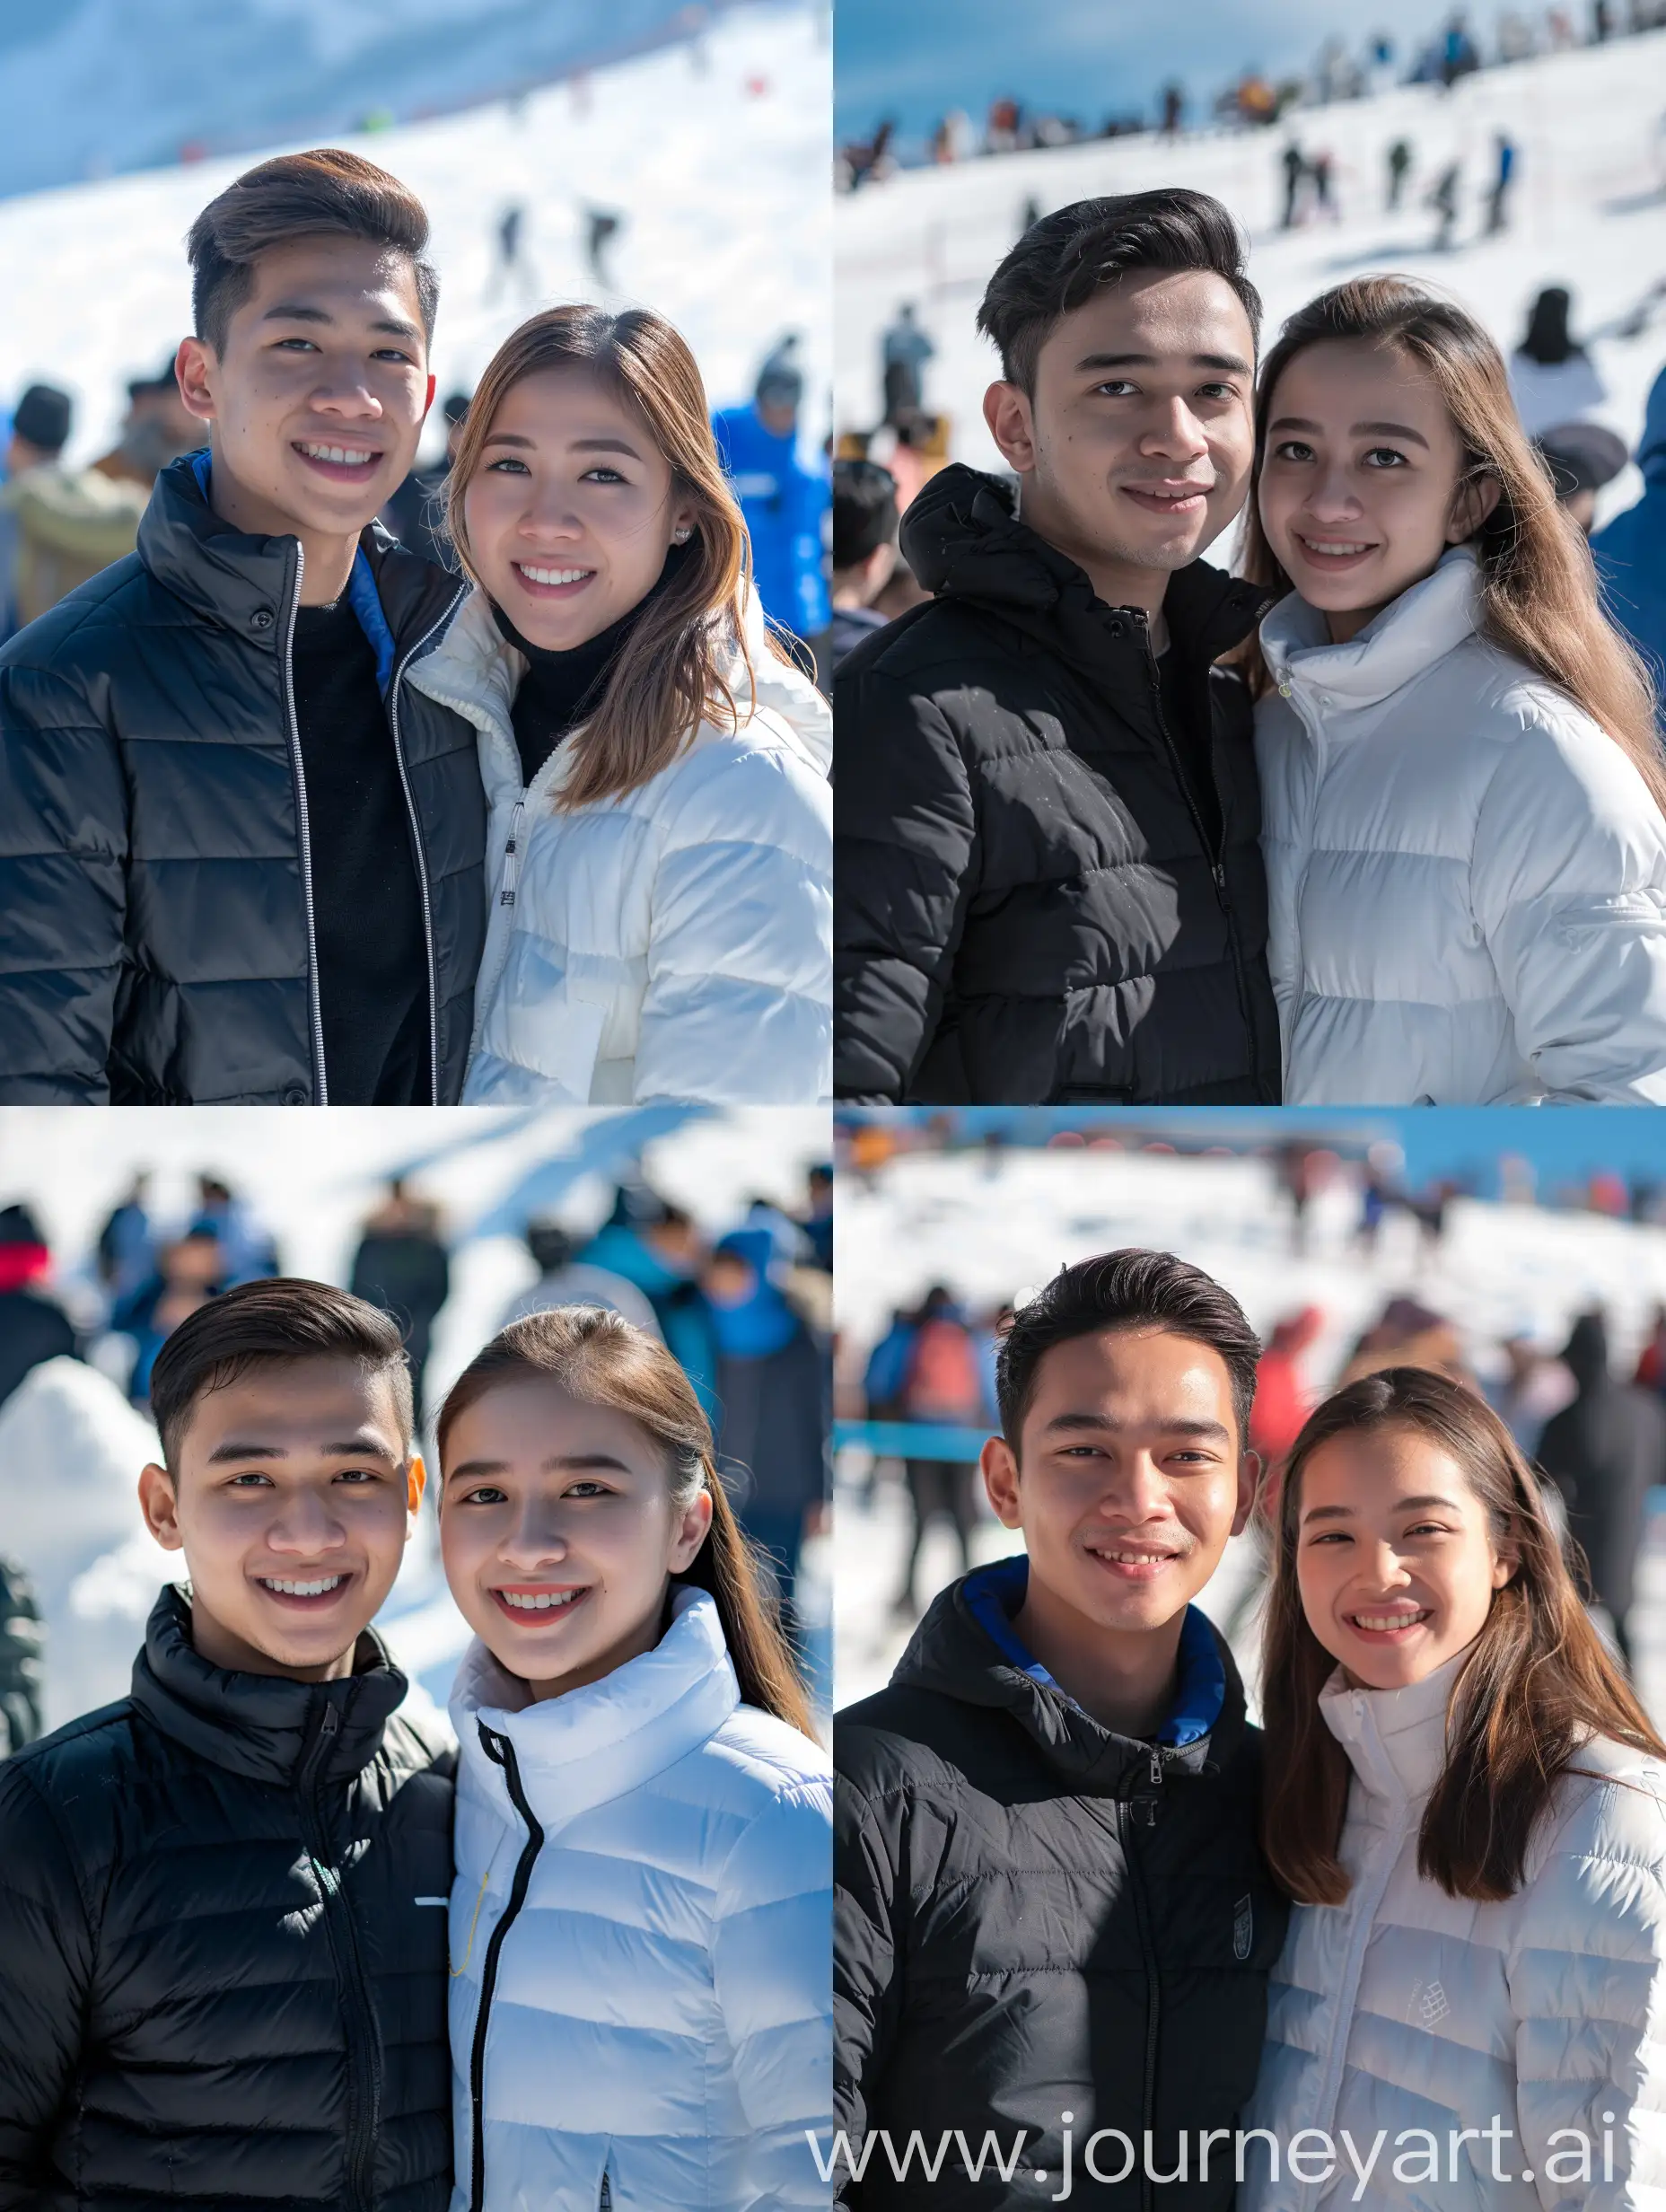 (8K, RAW Photo, Photography, Photorealistic, Realistic, Highest Quality, Intricate Detail), Medium photo of 25 year old Indonesian man, fit, slightly fat body, oval face, fair skin, natural skin, medium hair, wearing black season bubble jacket cold, wearing a winter blue Ciput, side by side with a 25 year old Indonesian woman in a white winter bubble jacket, wearing a winter blue and white Ciput, they smile facing the camera, their eyes look at the camera, the corners of their eyes are at eye level. behind the snow behind many people behind us the sky is bright blue white beautiful as it is